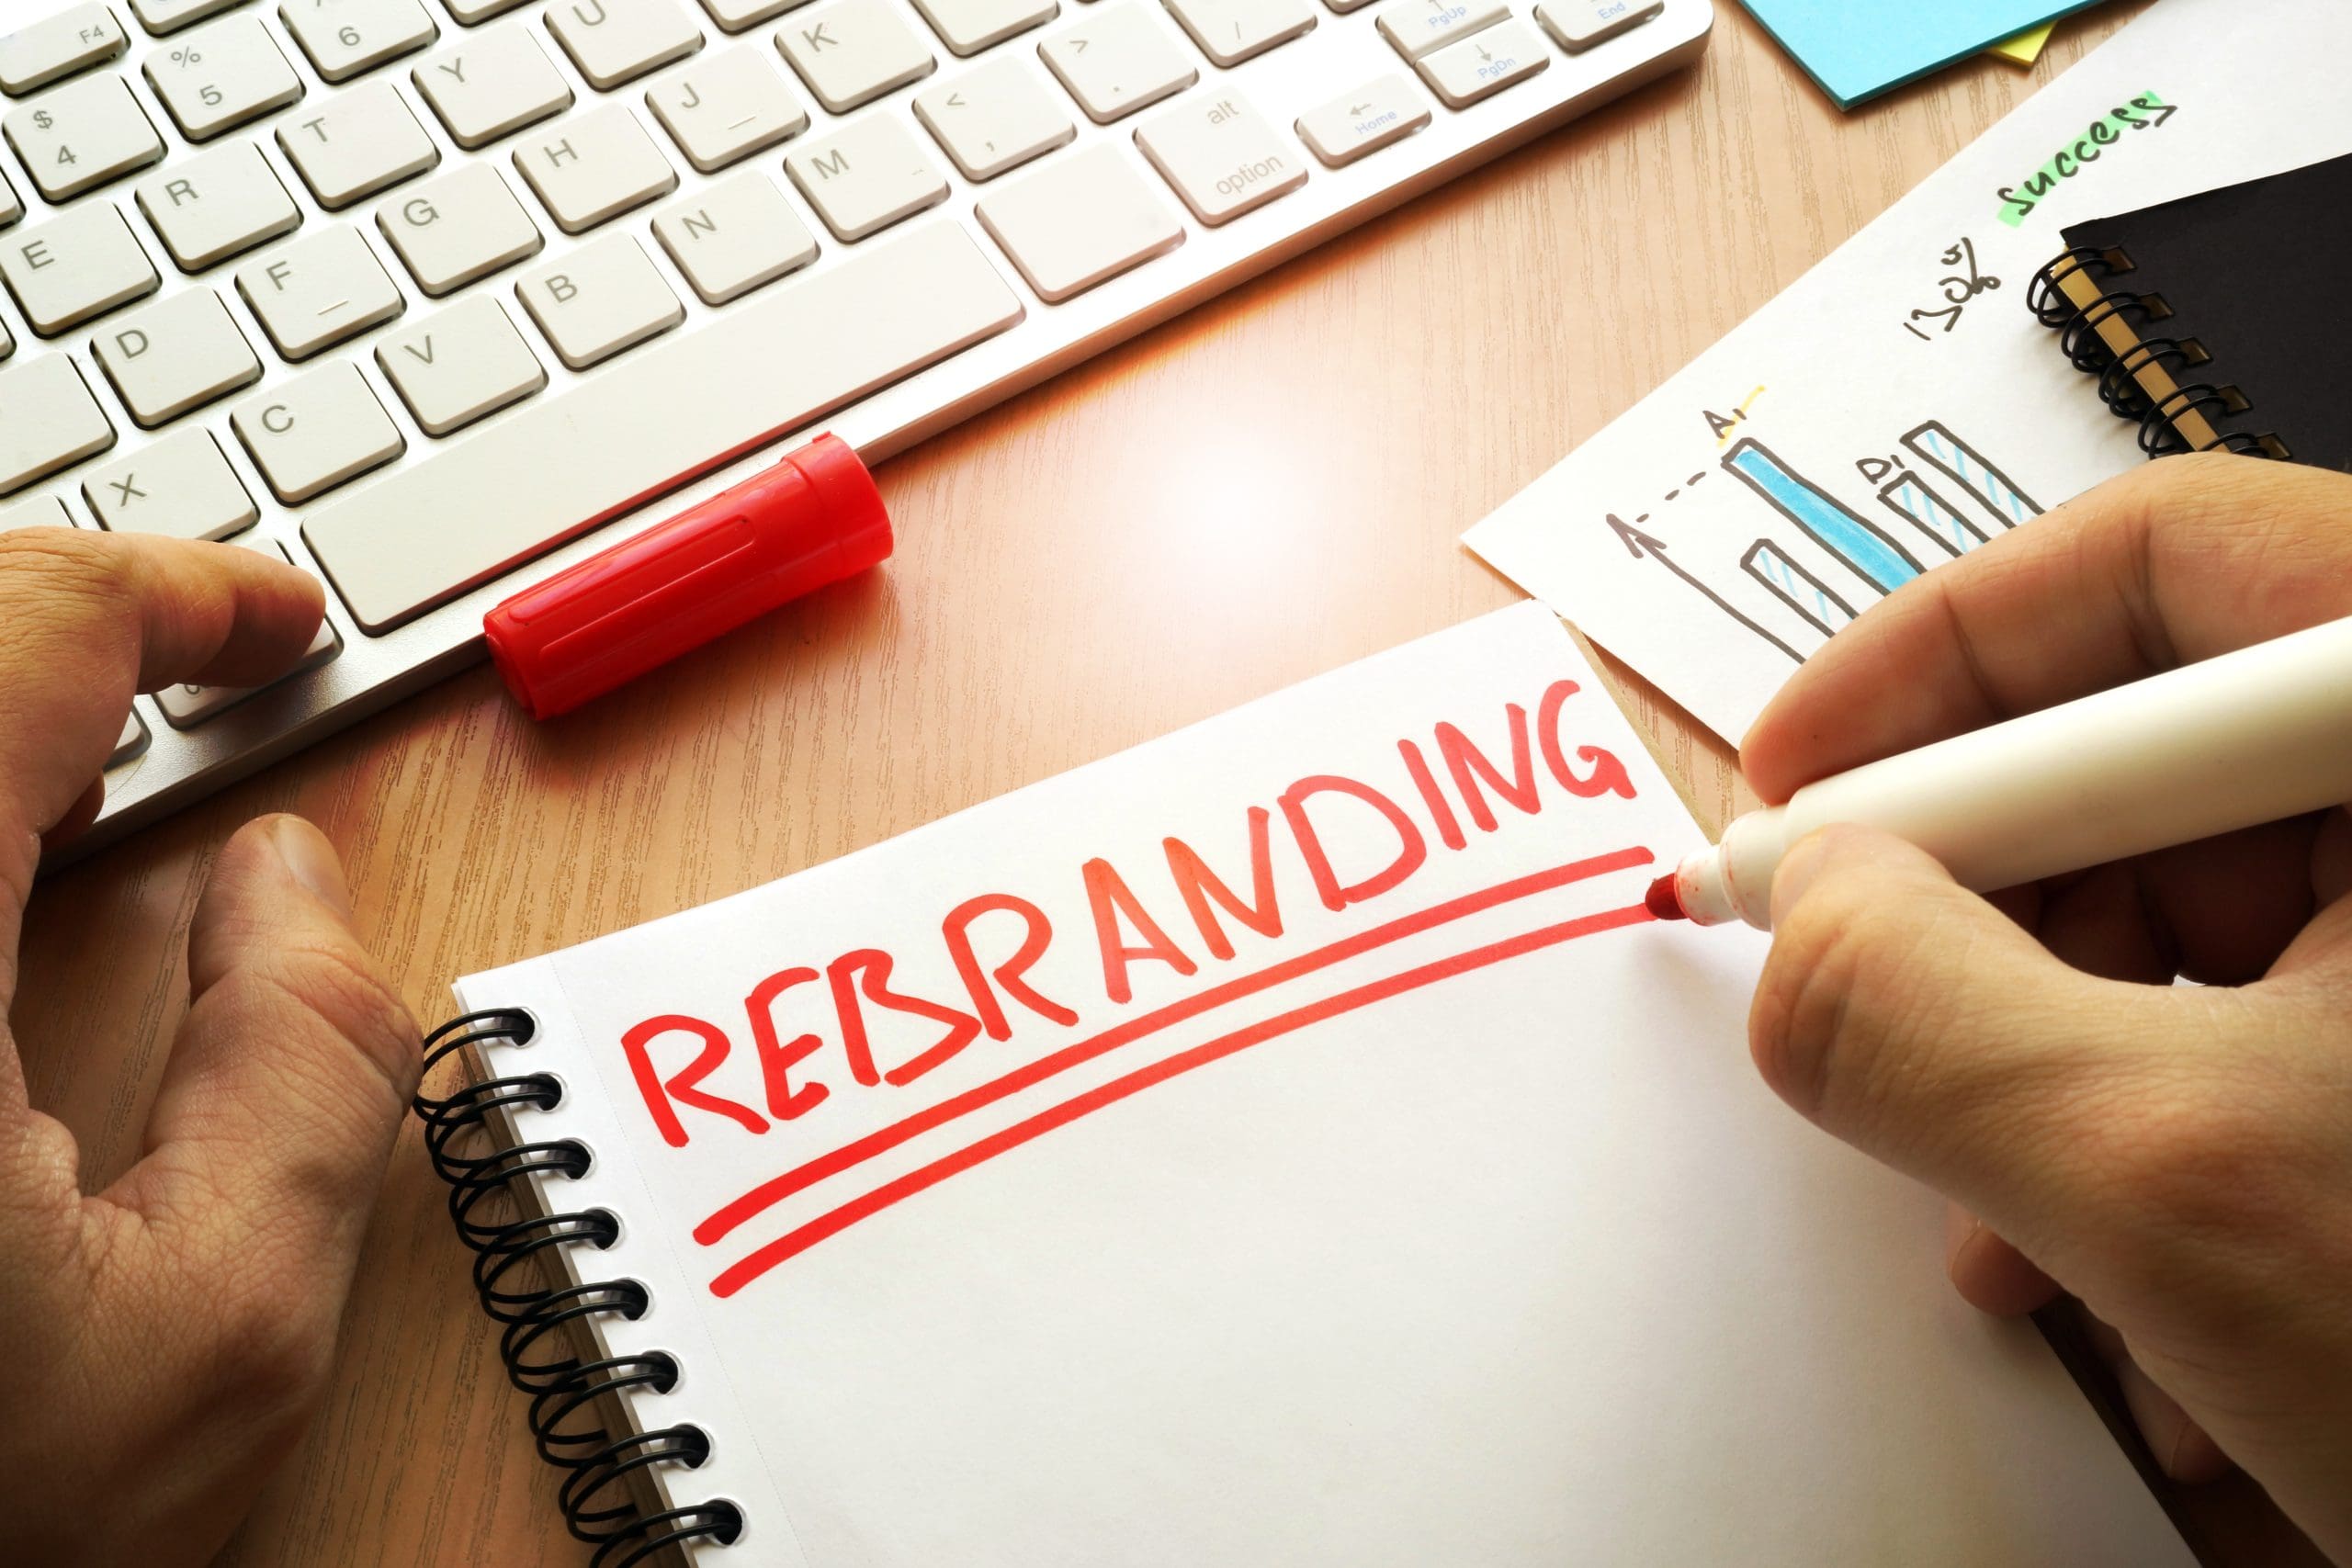 Top 12 Reasons to Rebrand Your Company + Tips for a Successful Rebranding Campaign